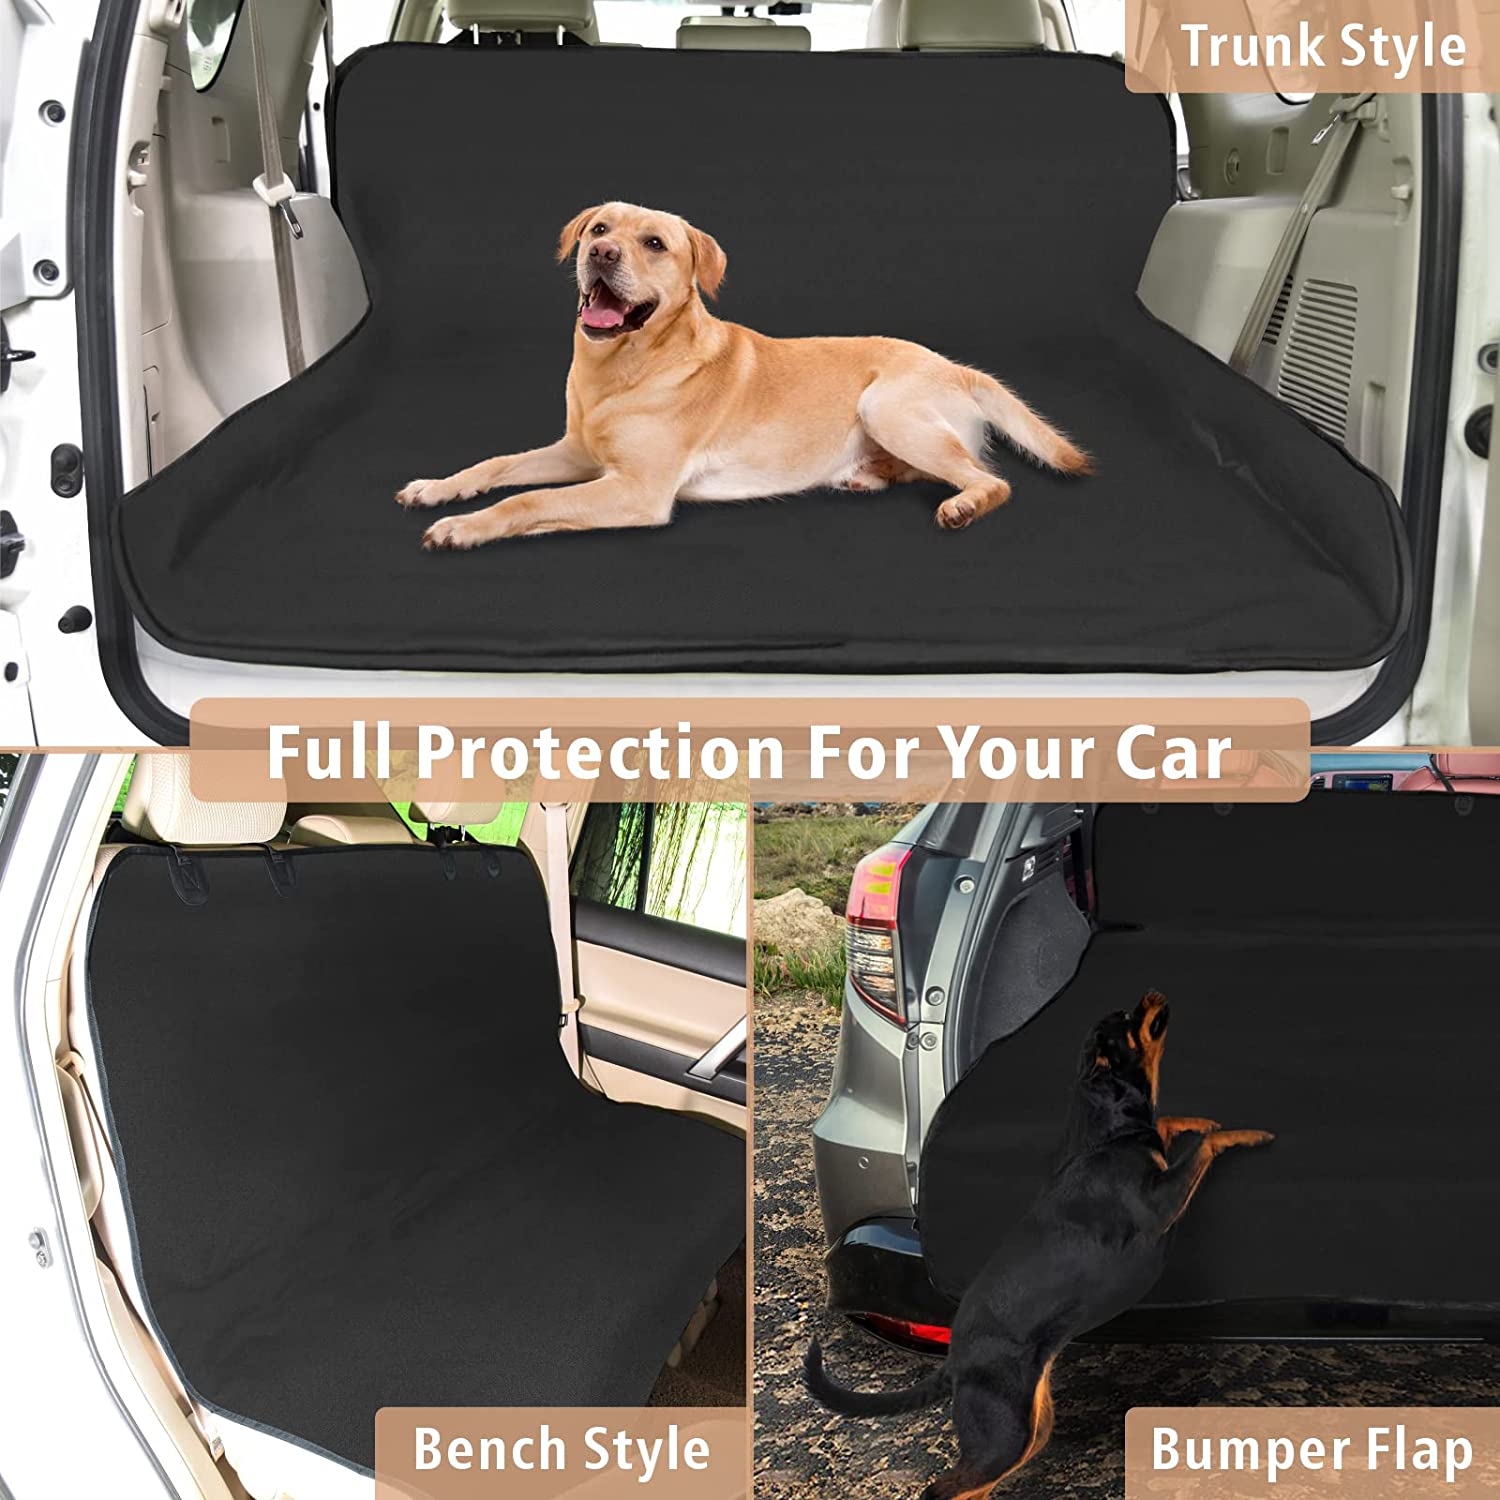 Common Mistakes to Avoid When Using SUV Cargo Liners for Dog